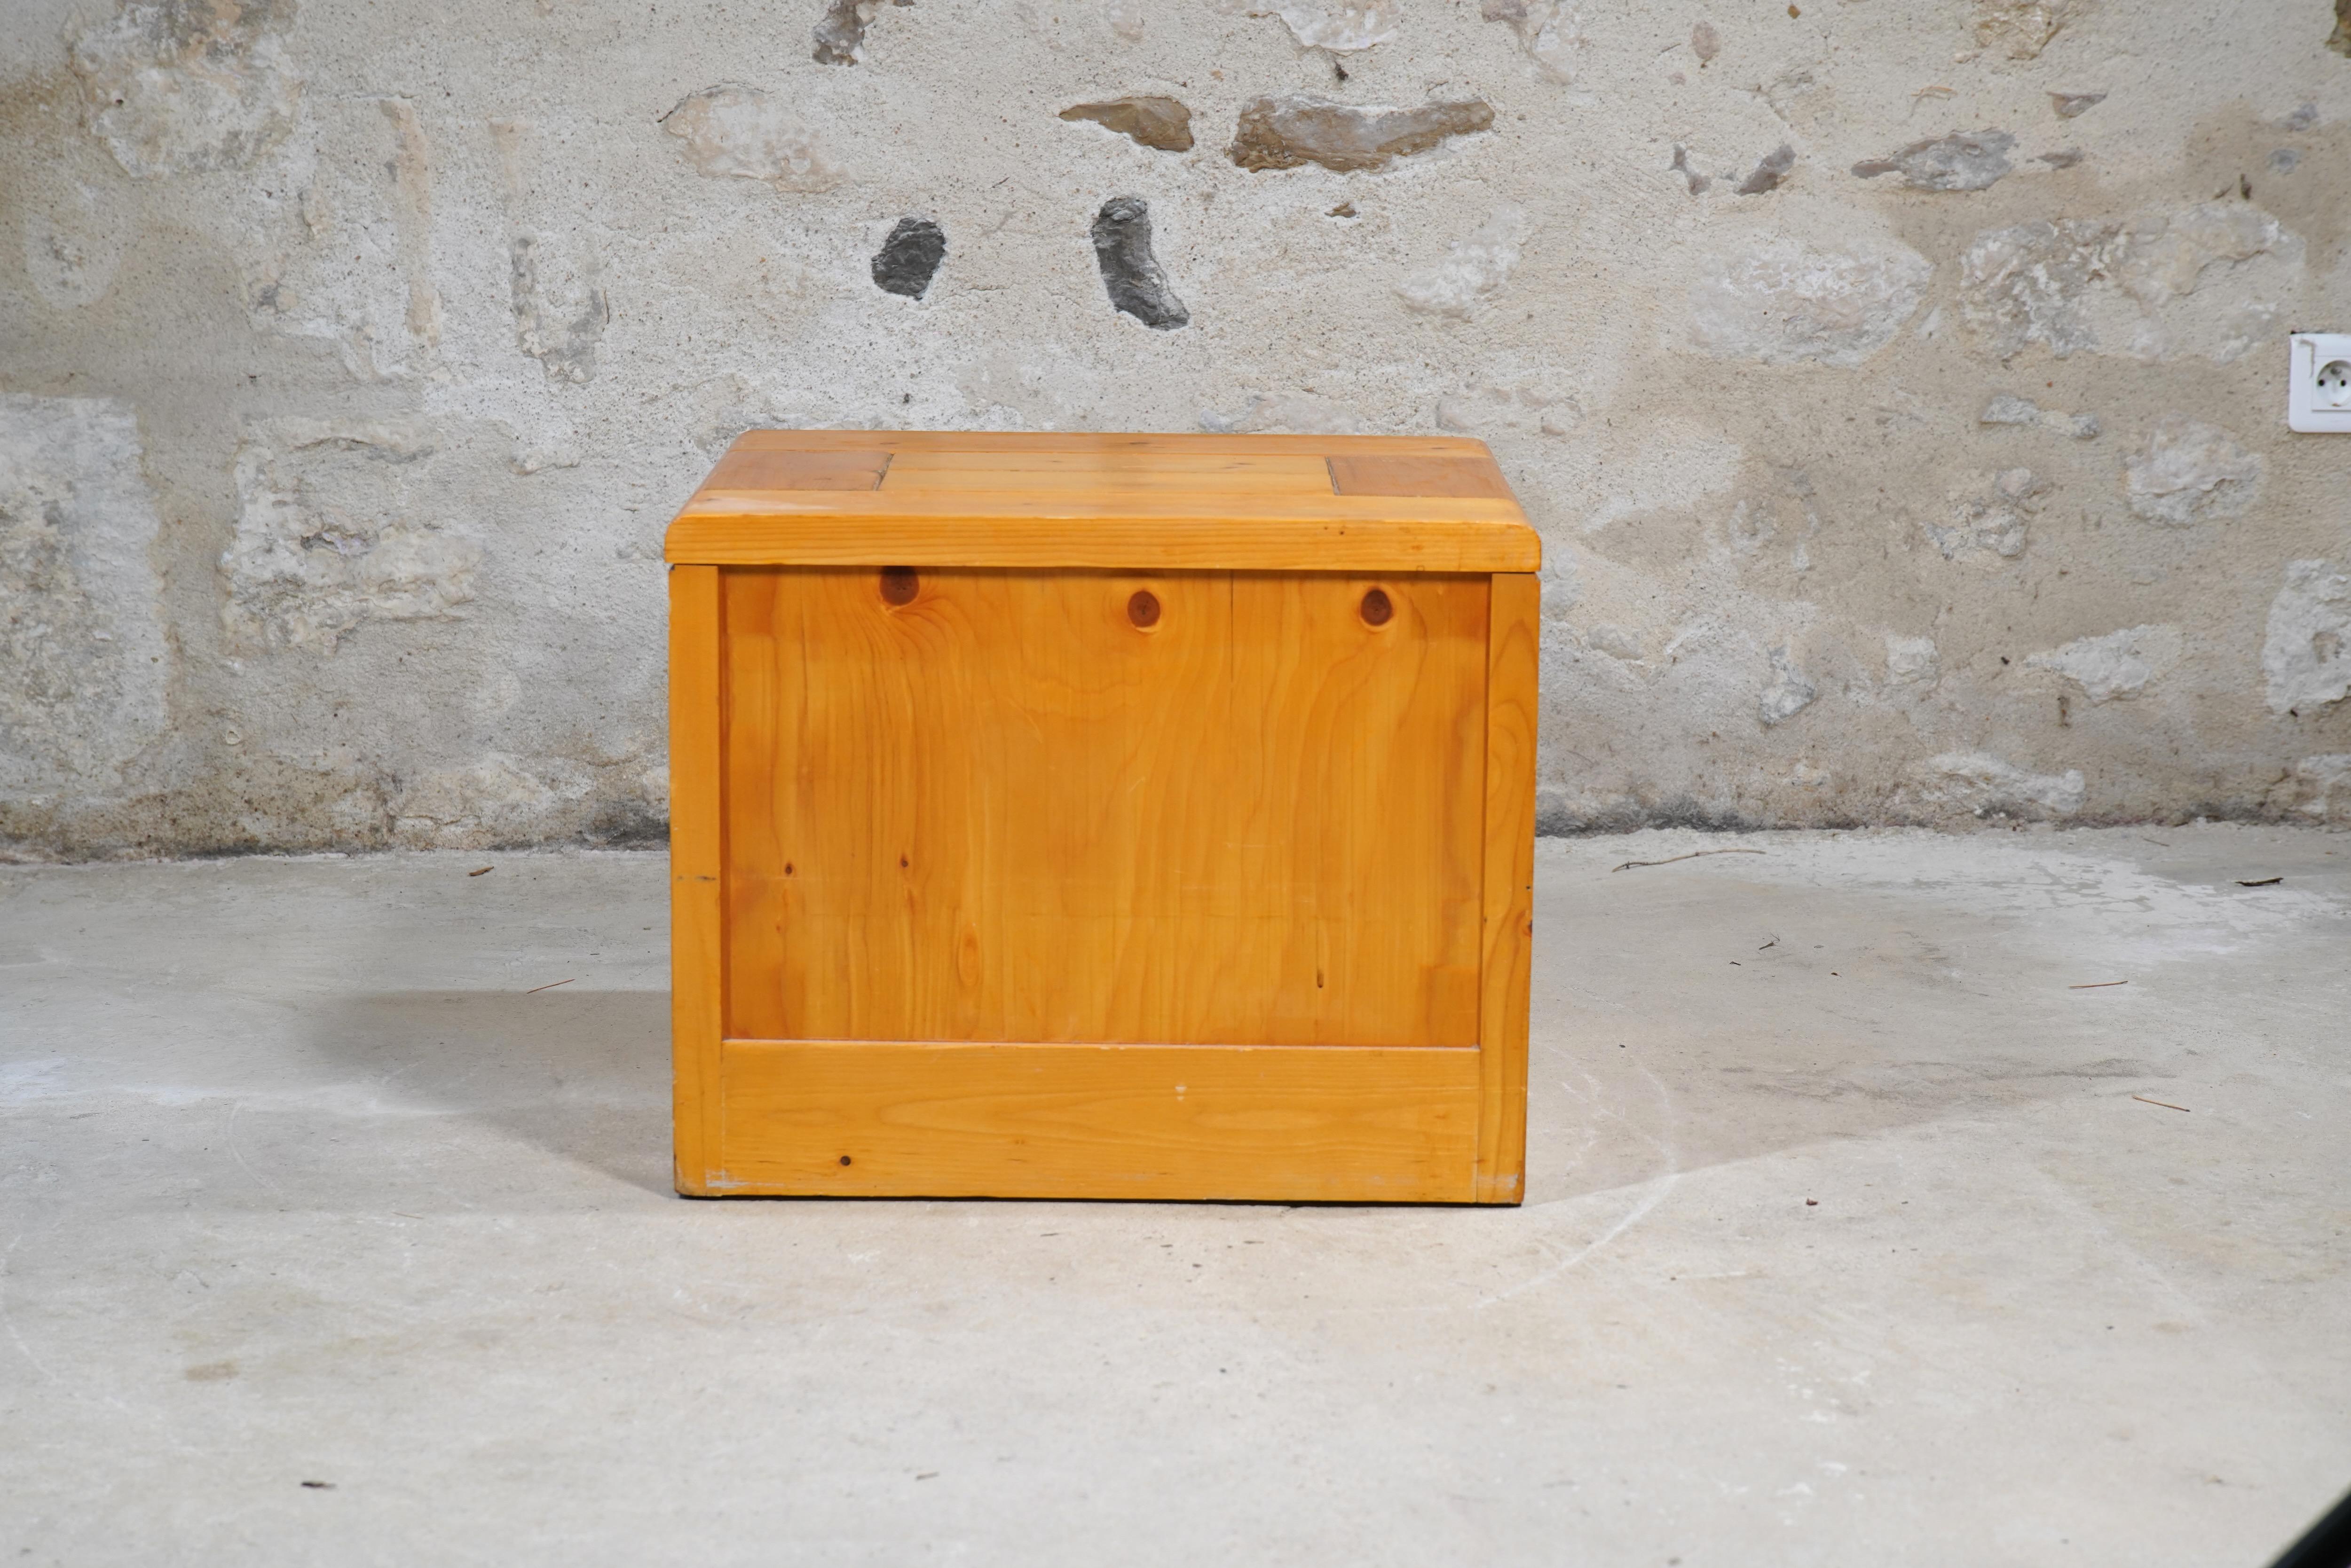 Français Charlotte Perriand Night Stand from Les Arcs in Savoie, France c. C. 1970 en vente